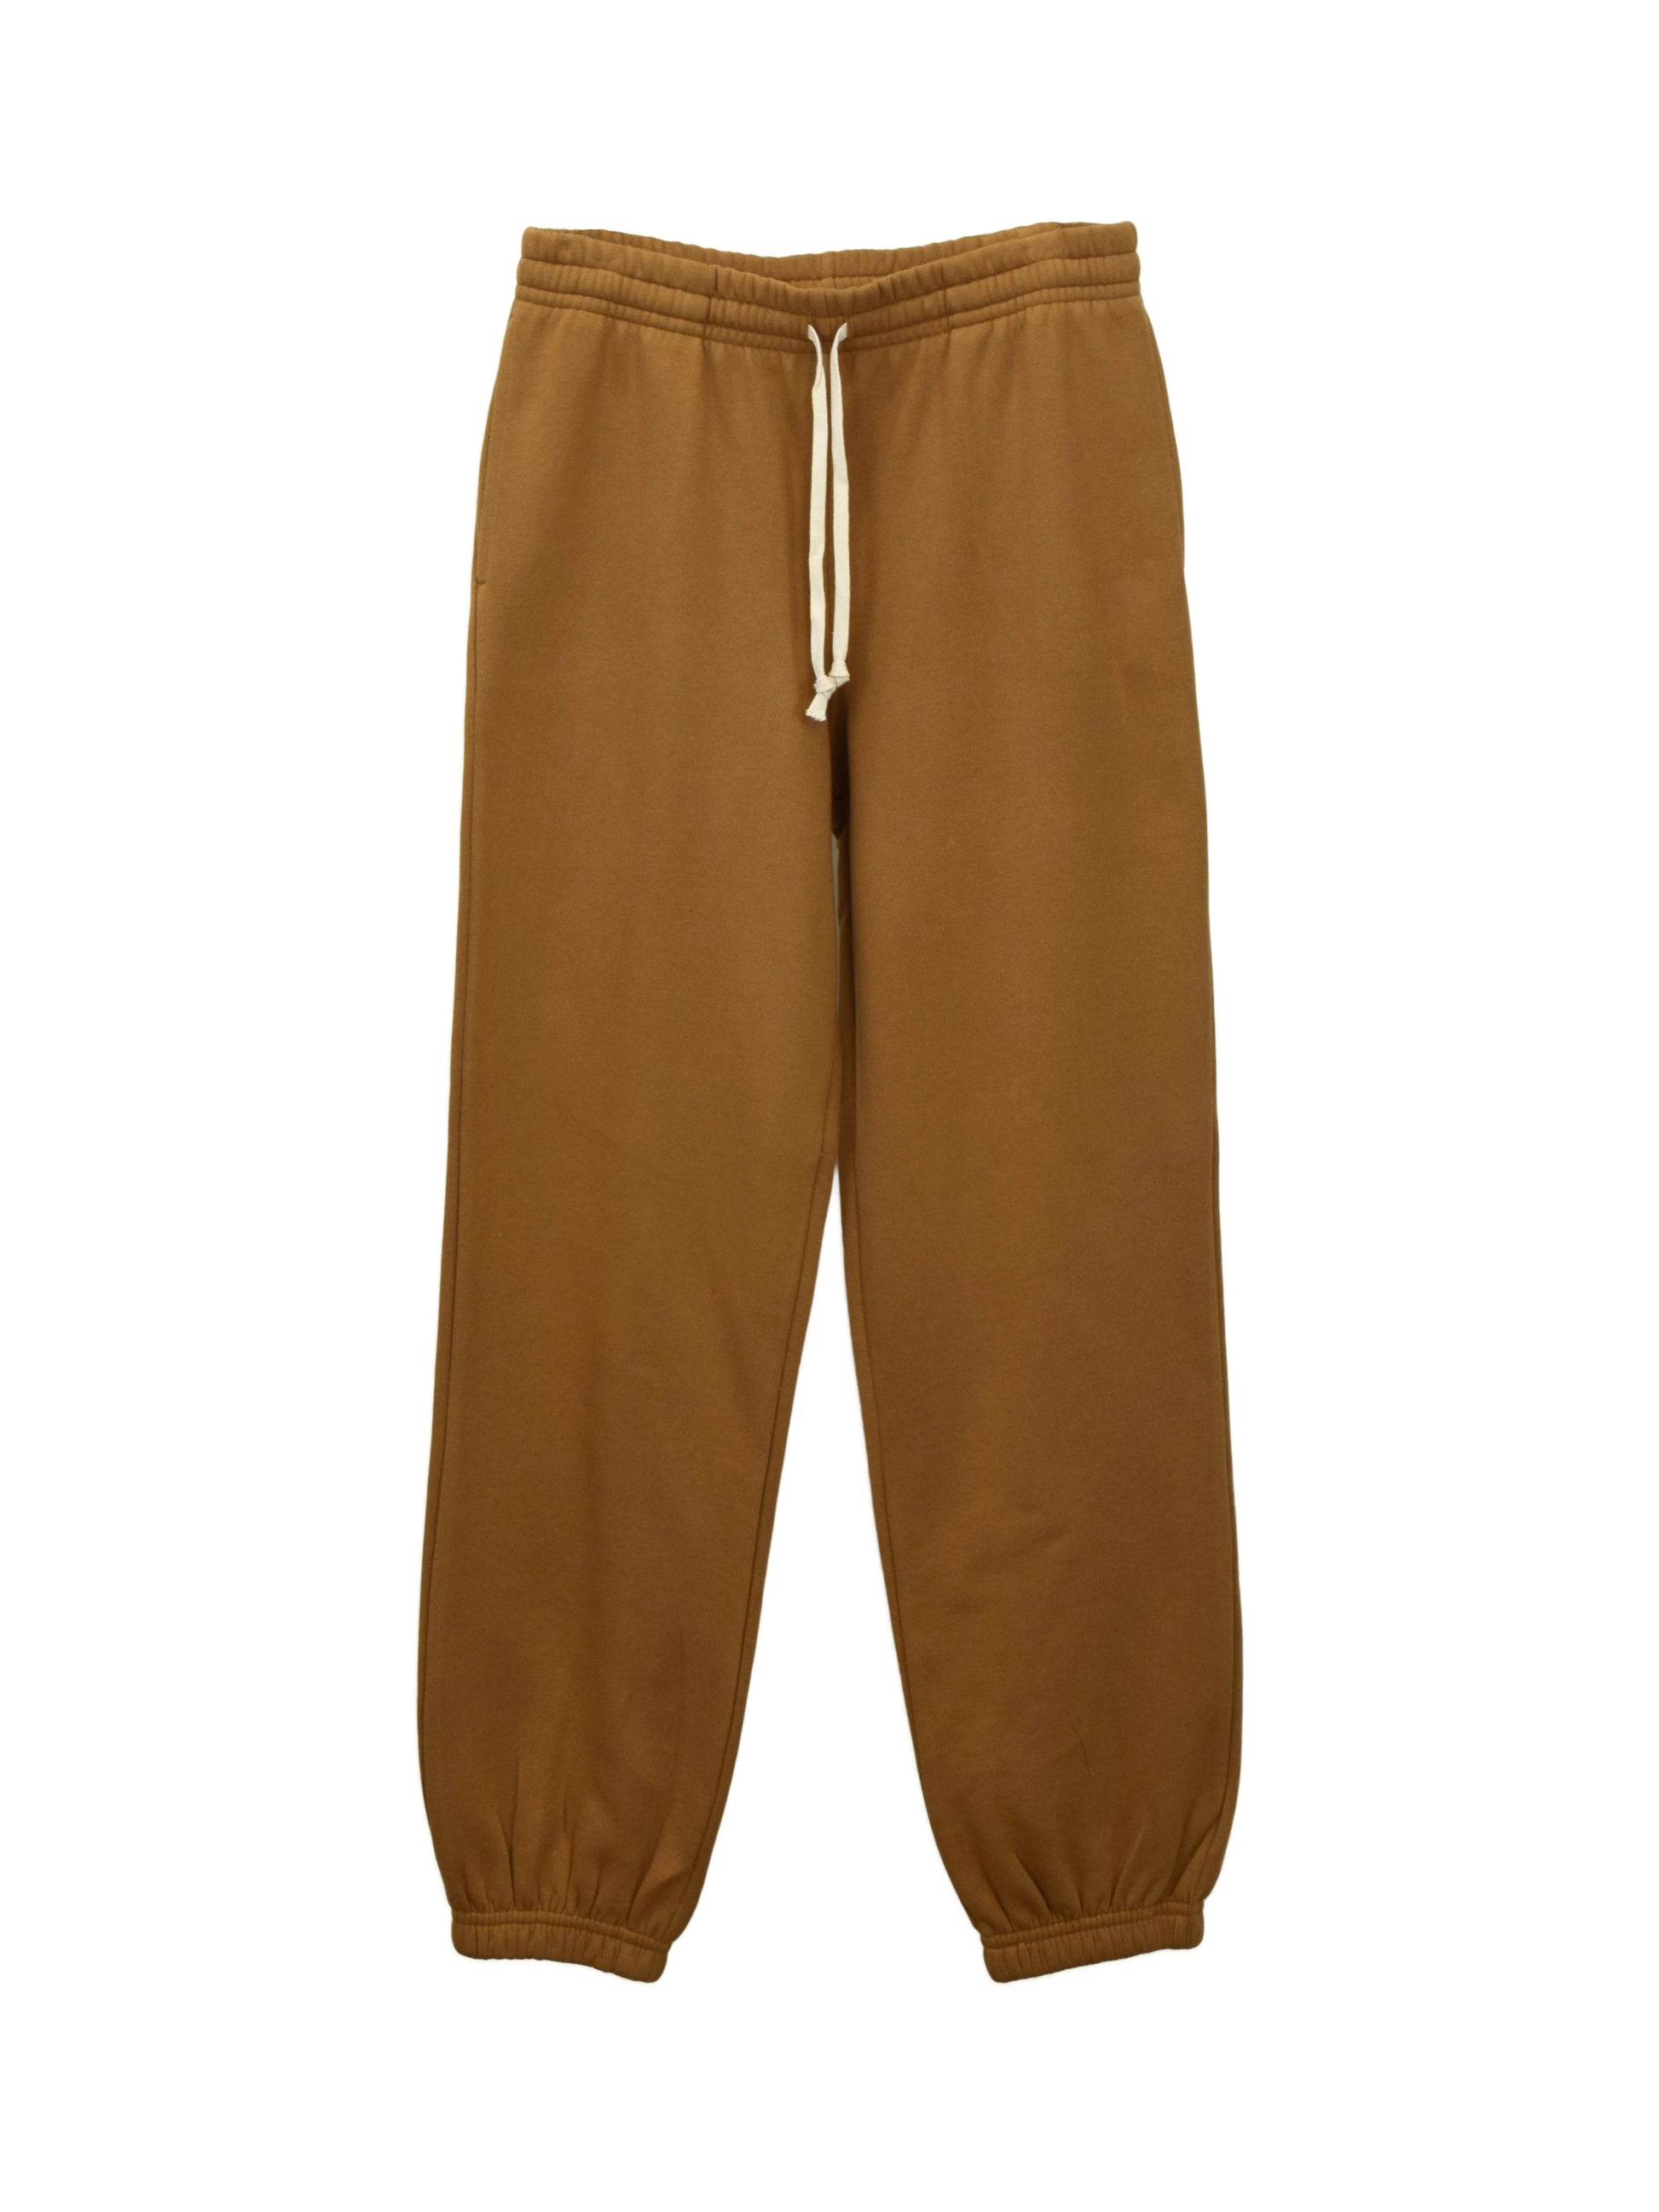 Groundhog brown sweatpants with flexible ankle cuffs and white drawstrings